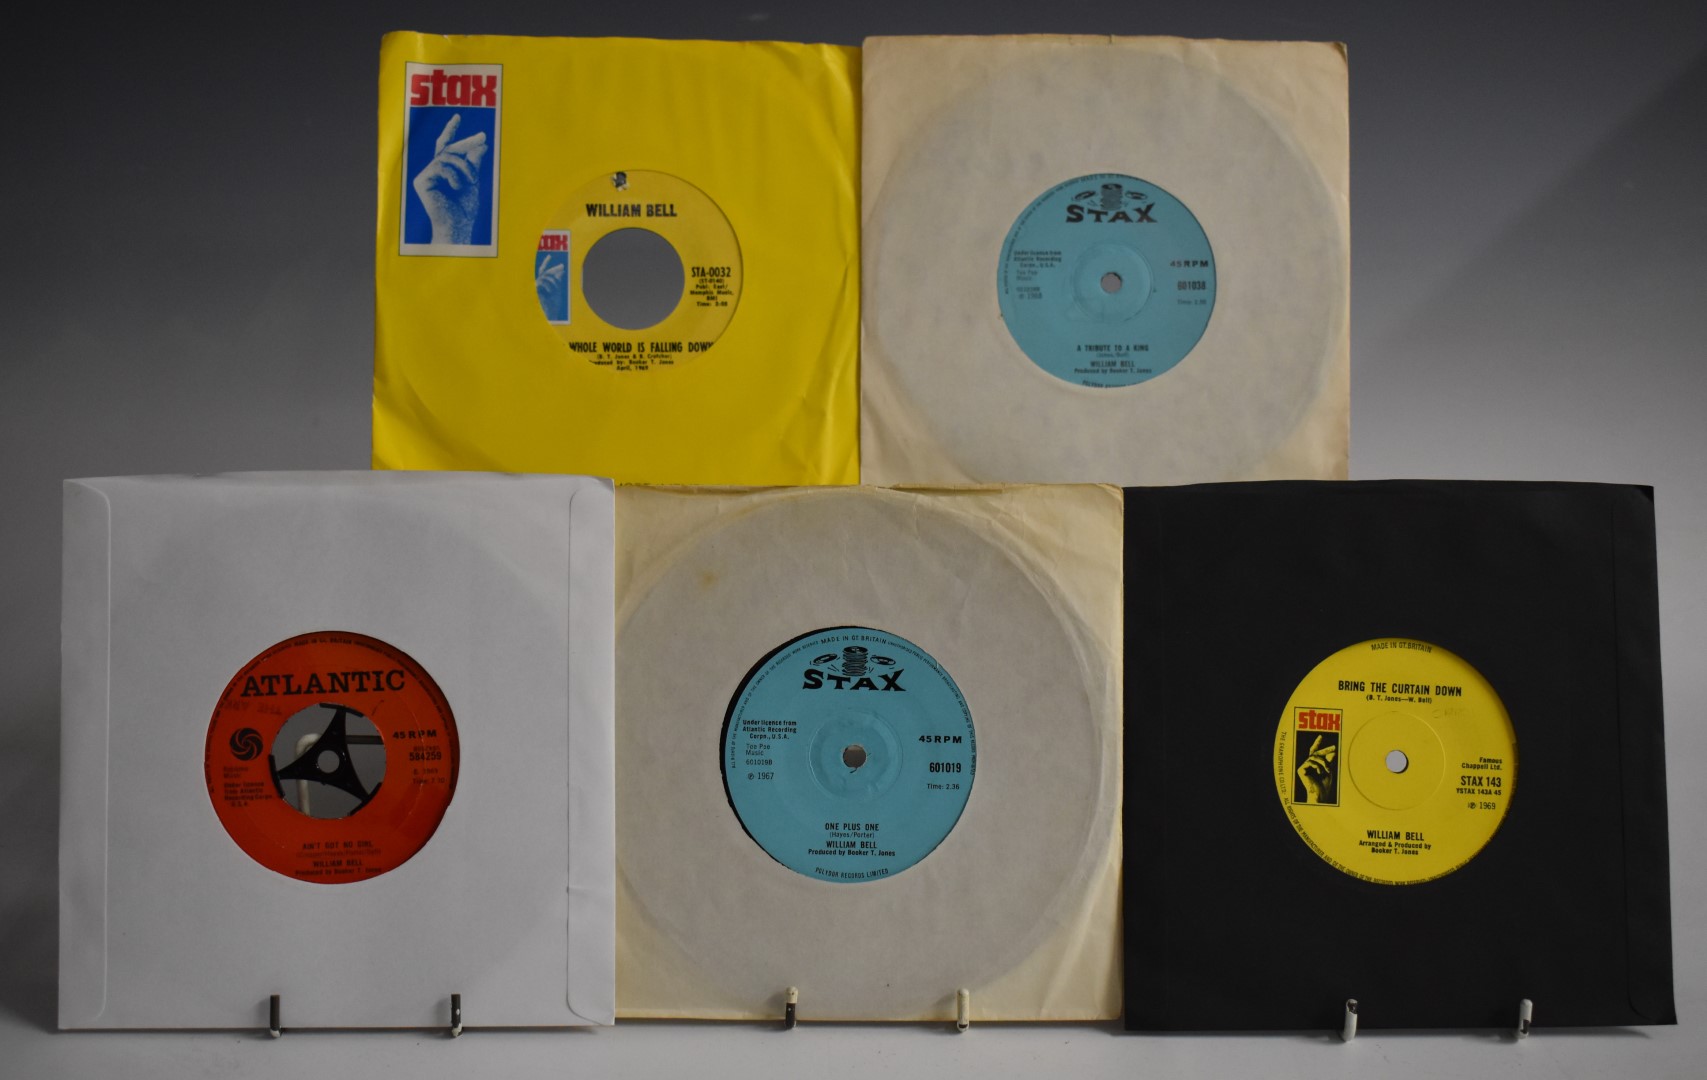 William Bell - Nineteen singles, USA and UK issue